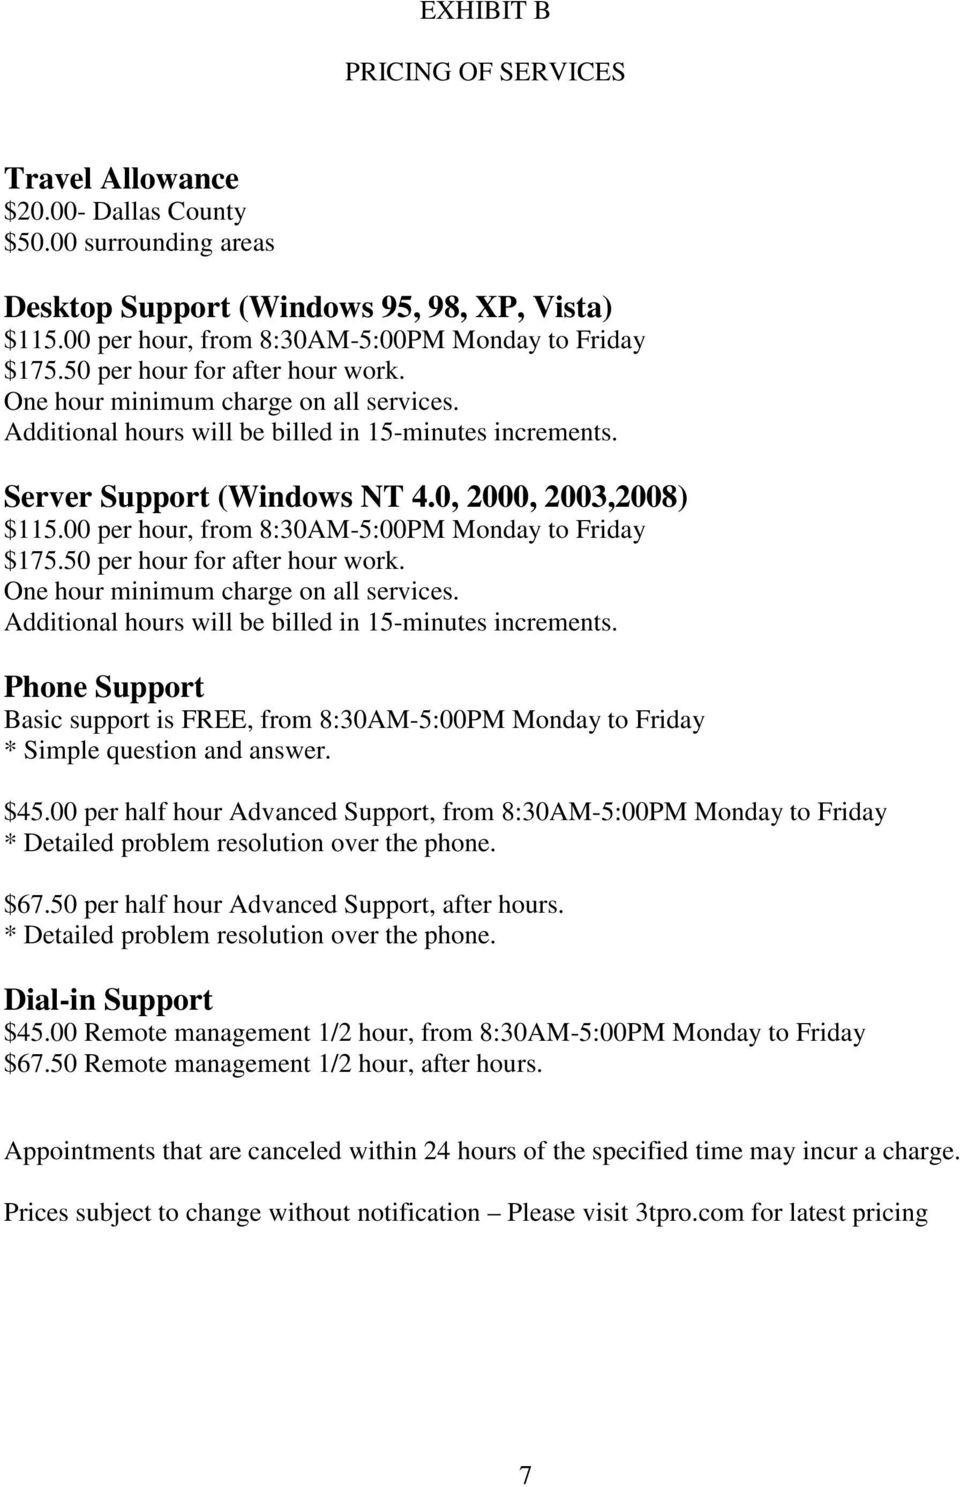 Server Support (Windows NT 4.0, 2000, 2003,2008) $115. Phone Support Basic support is FREE, from 8:30AM-5:00PM Monday to Friday * Simple question and answer. $45.